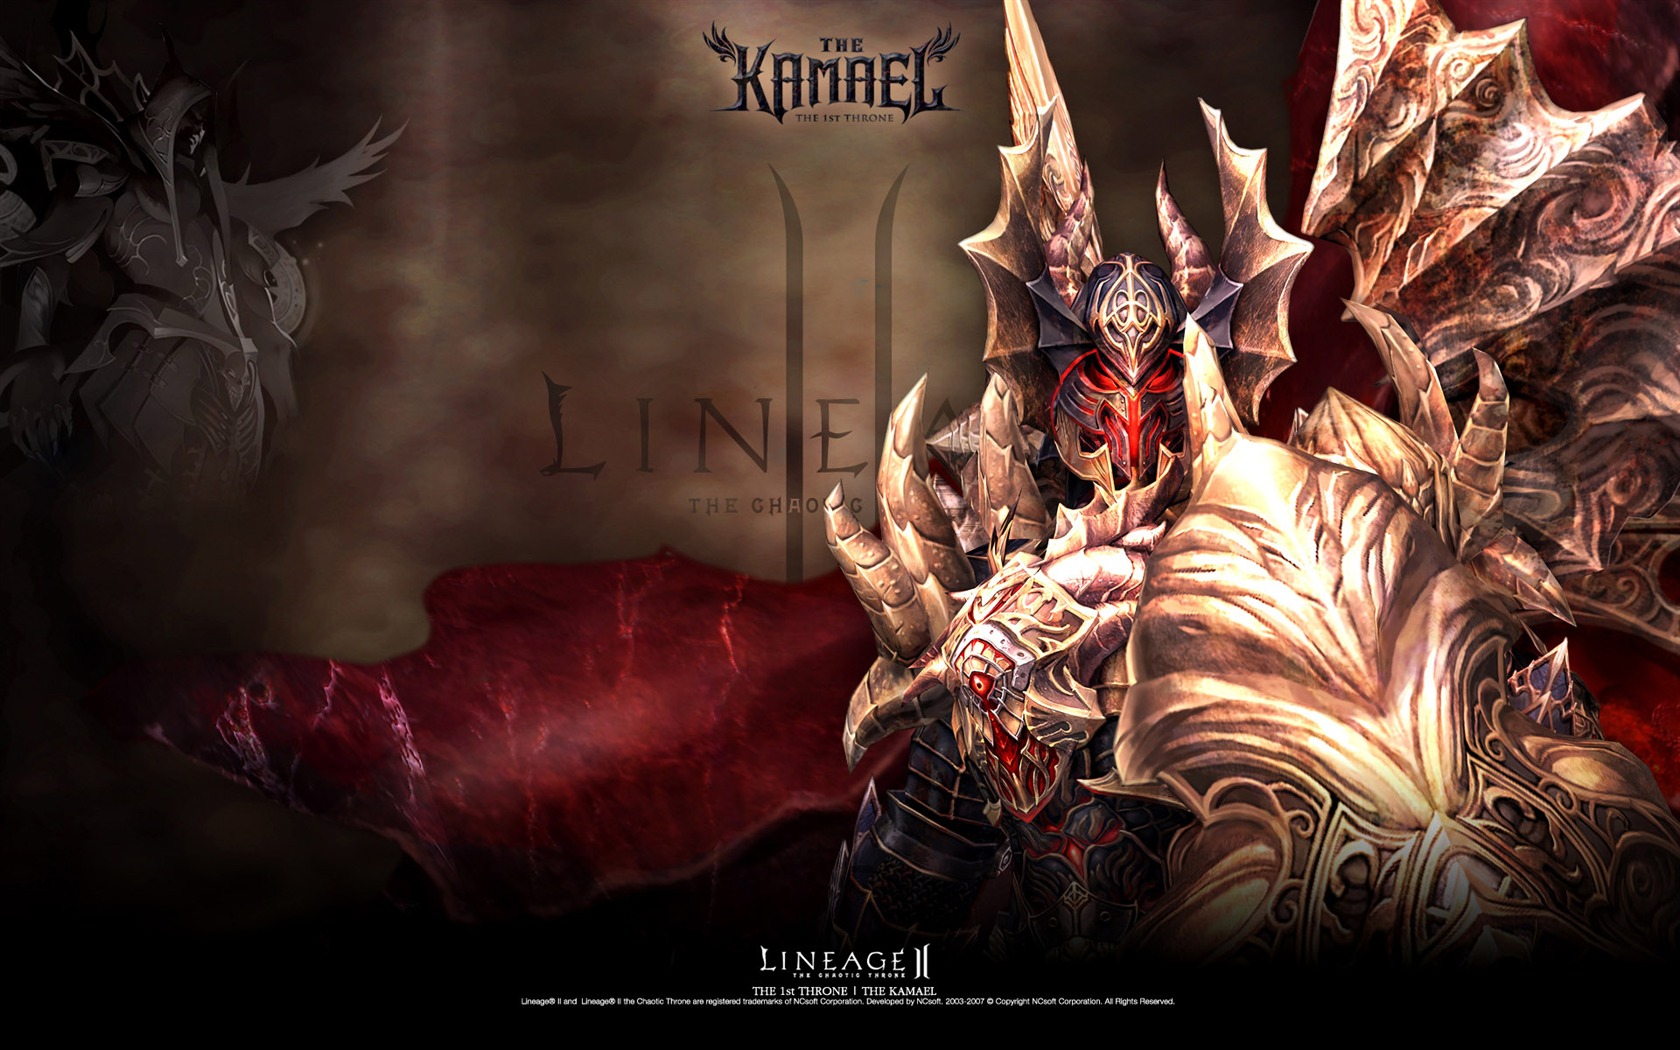 LINEAGE Ⅱ modeling HD gaming wallpapers #11 - 1680x1050